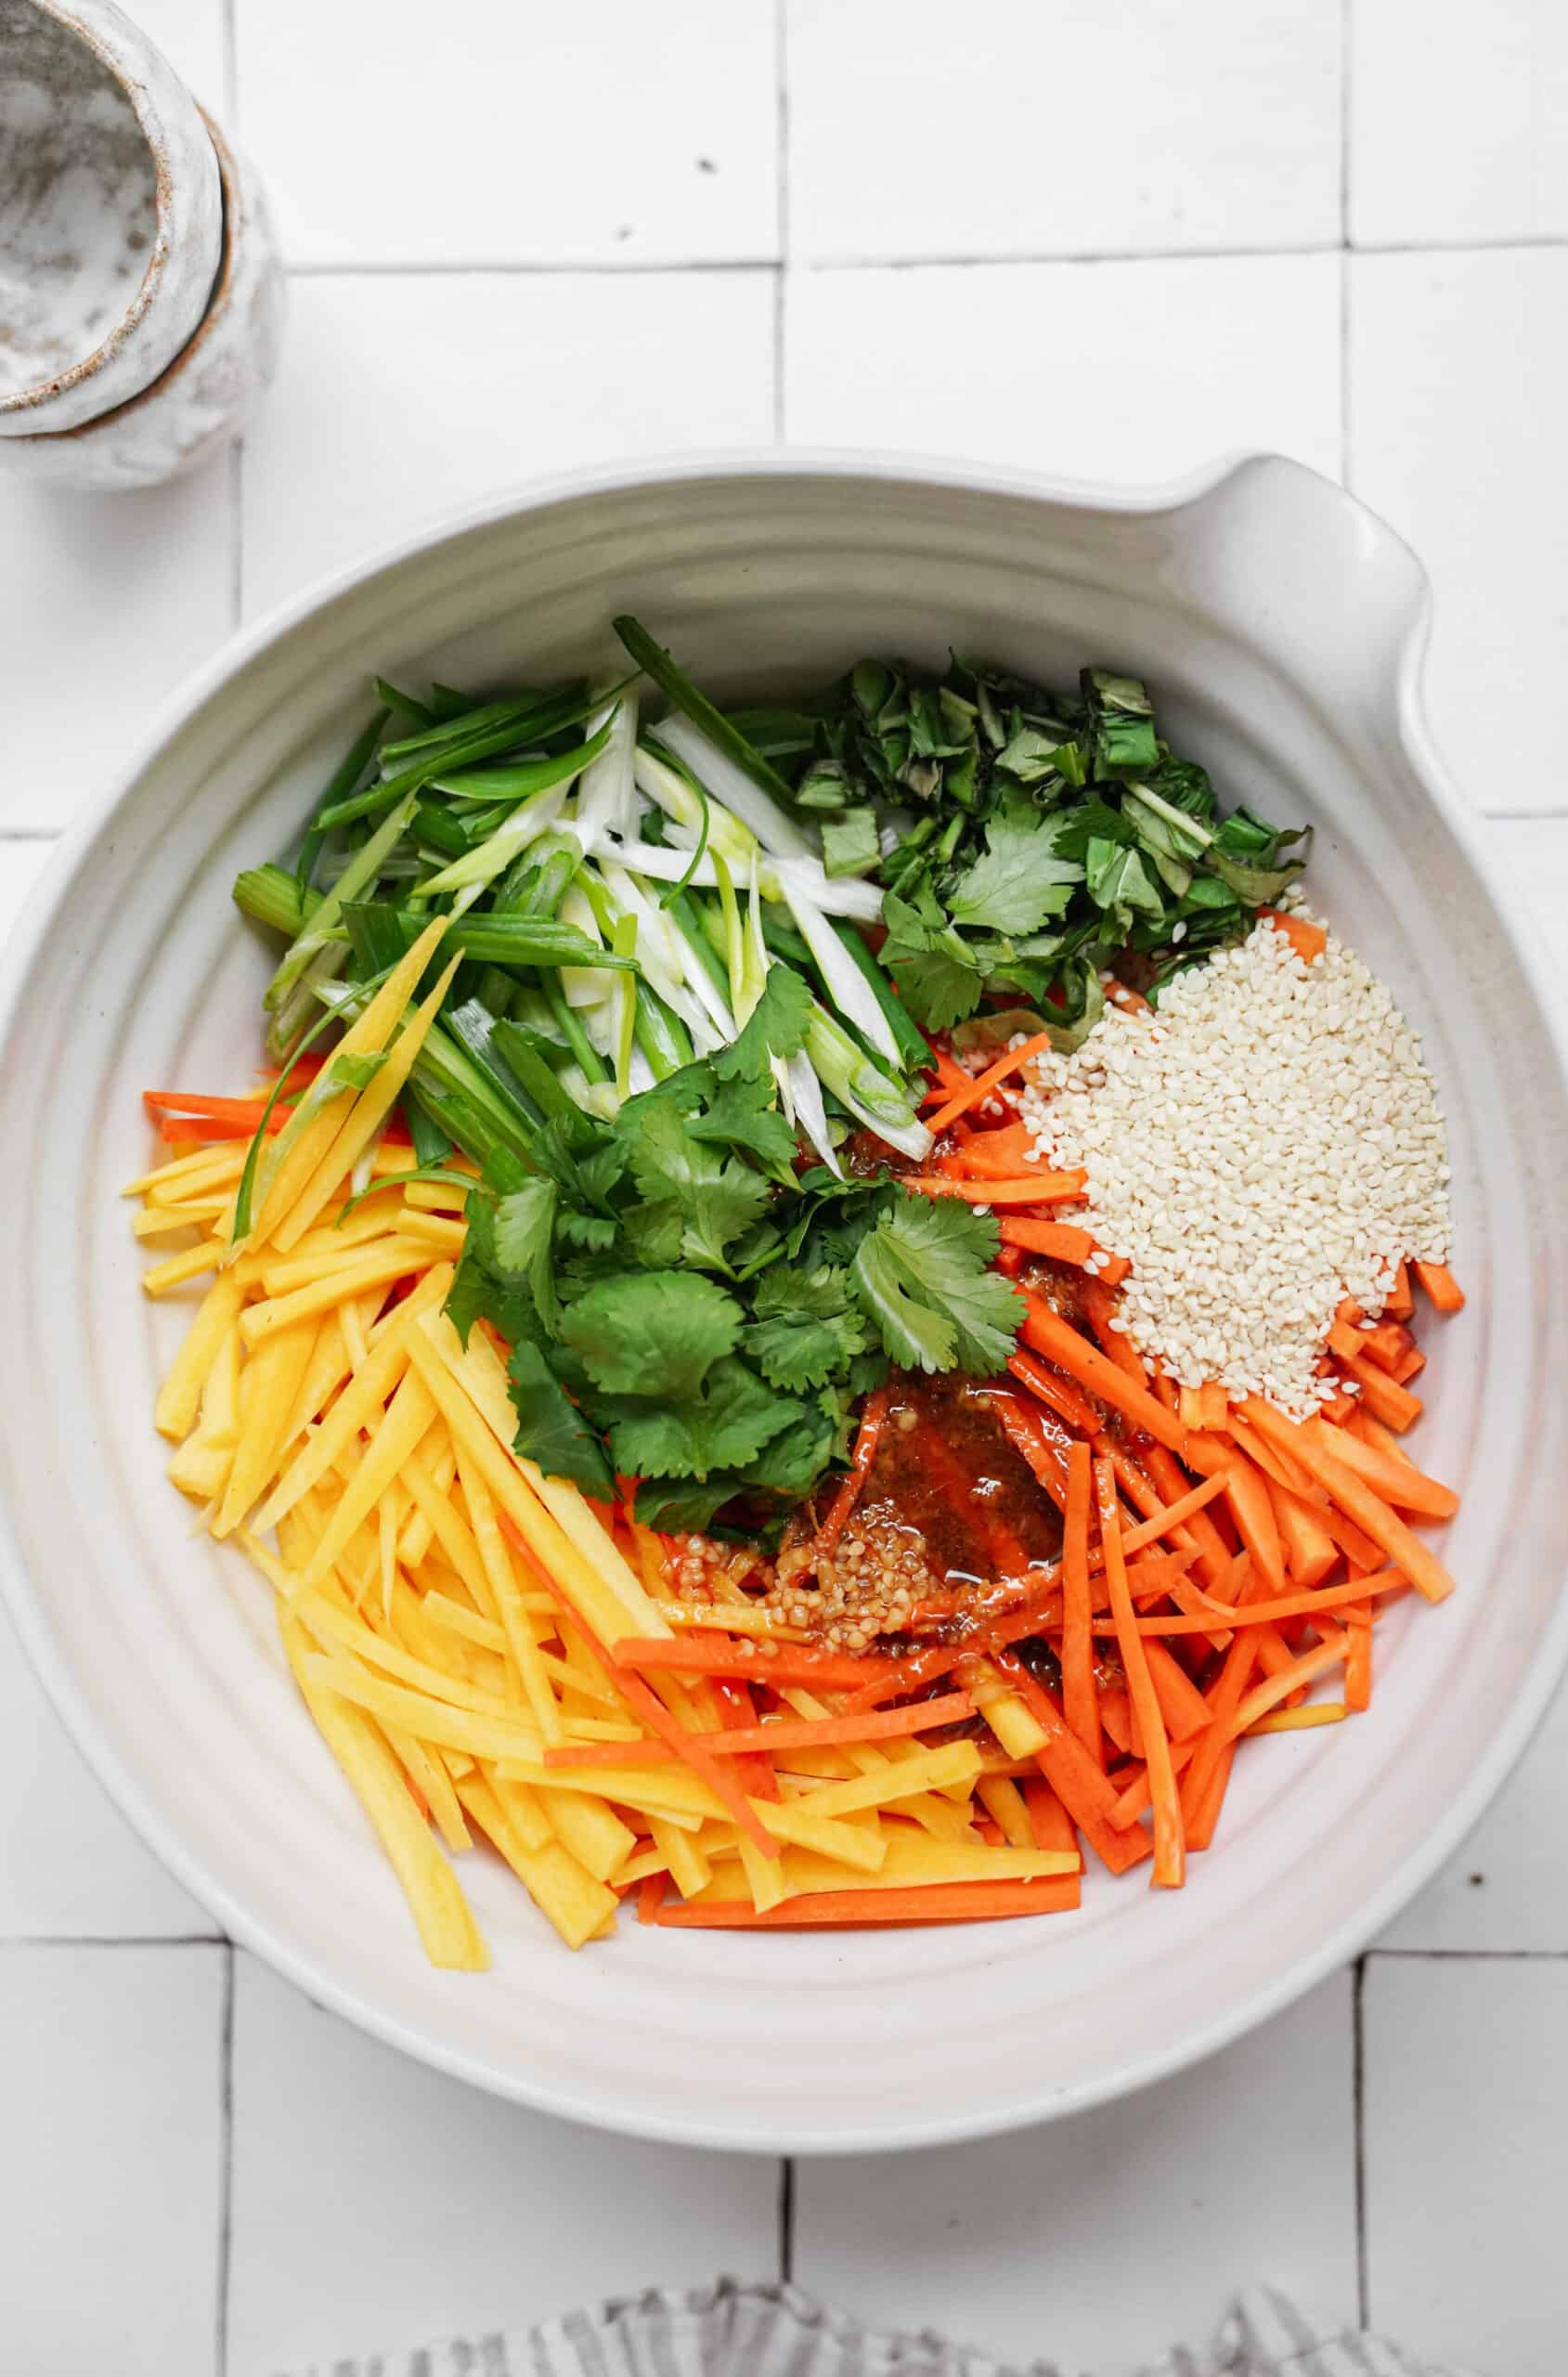 Fresh ingredients for carrot salad in a bowl